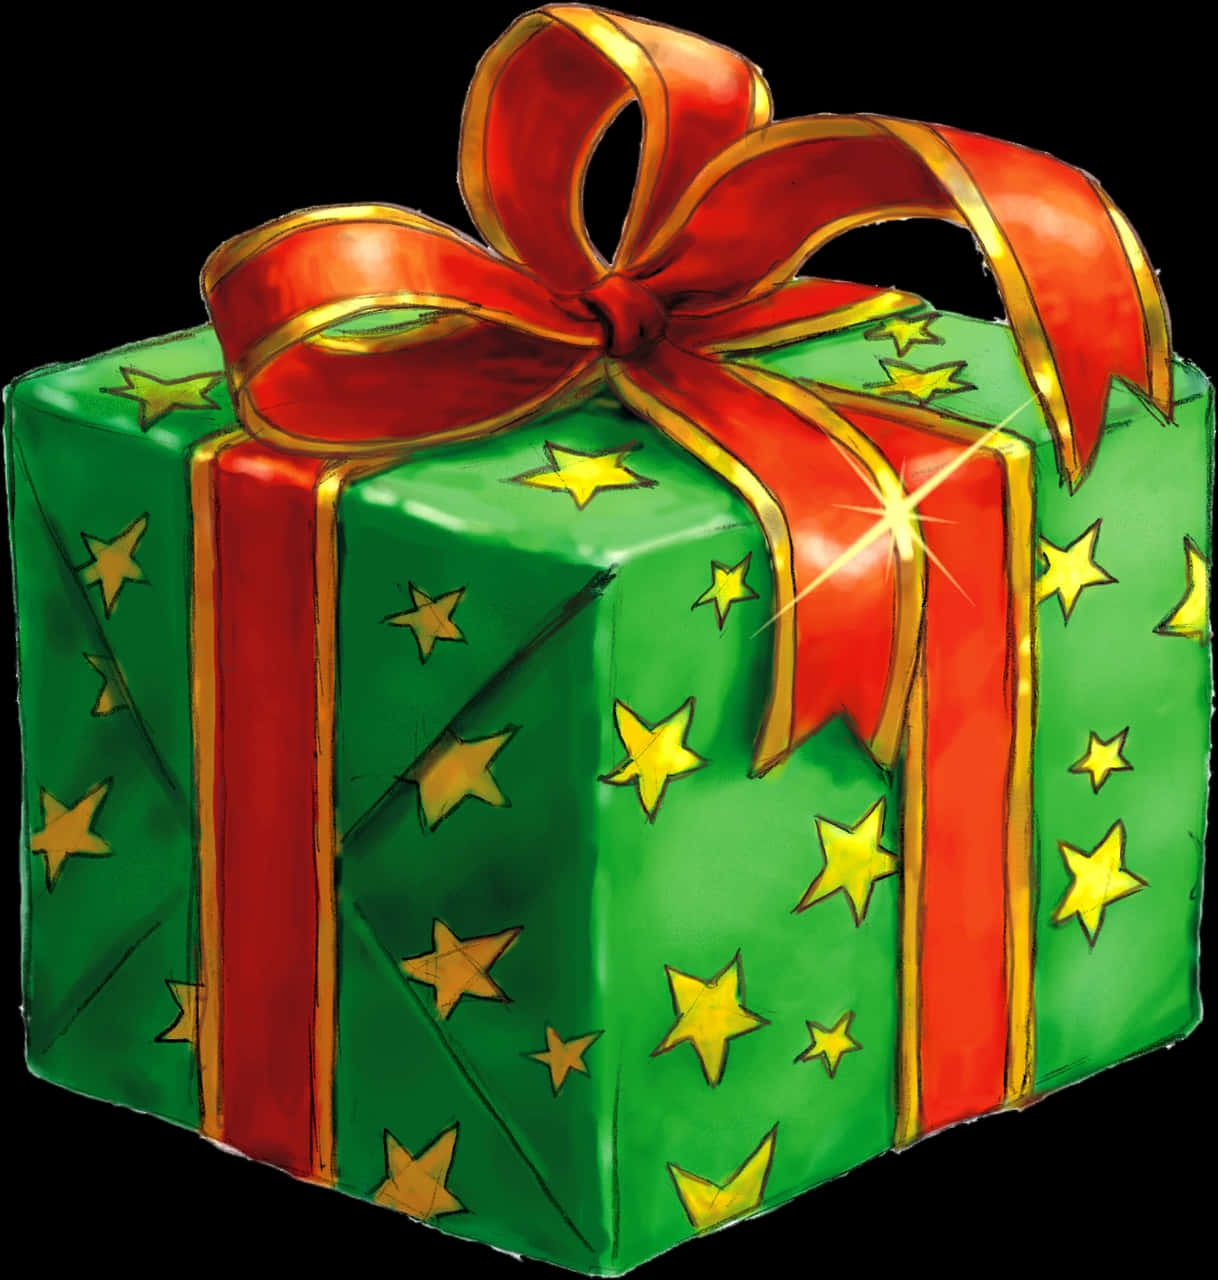 A Green Wrapped Present With Red Ribbon And Gold Stars